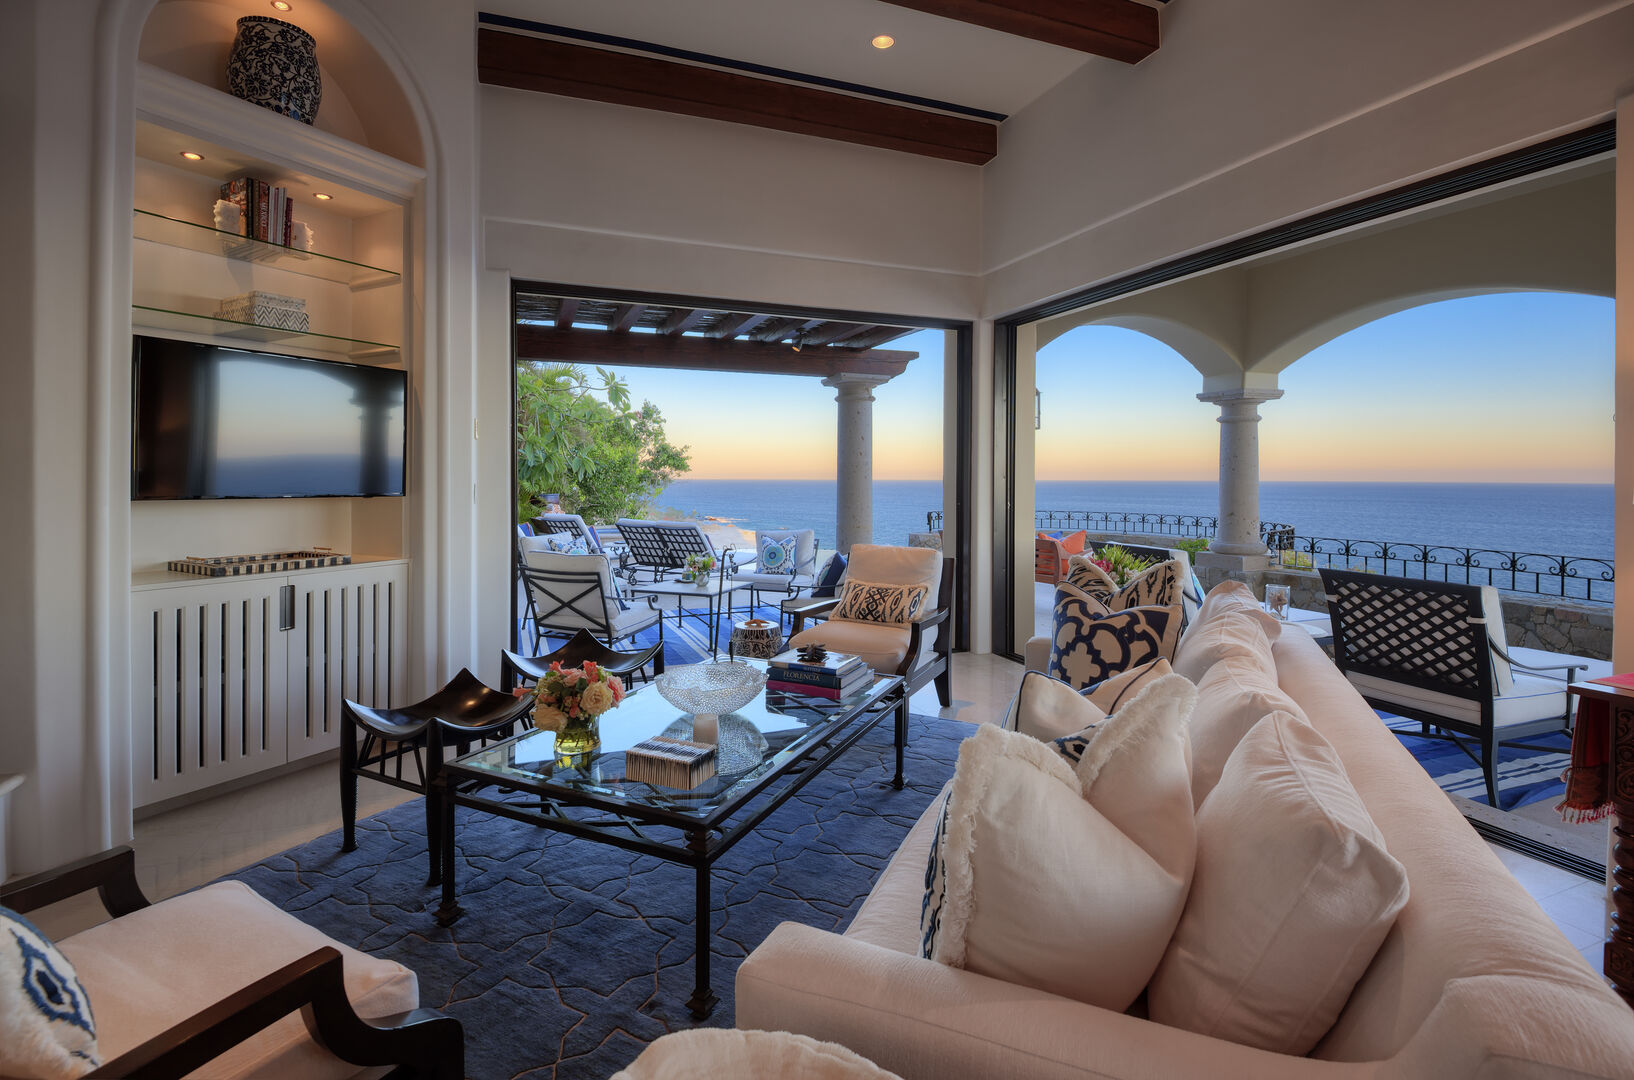 Living room with television and ocean views